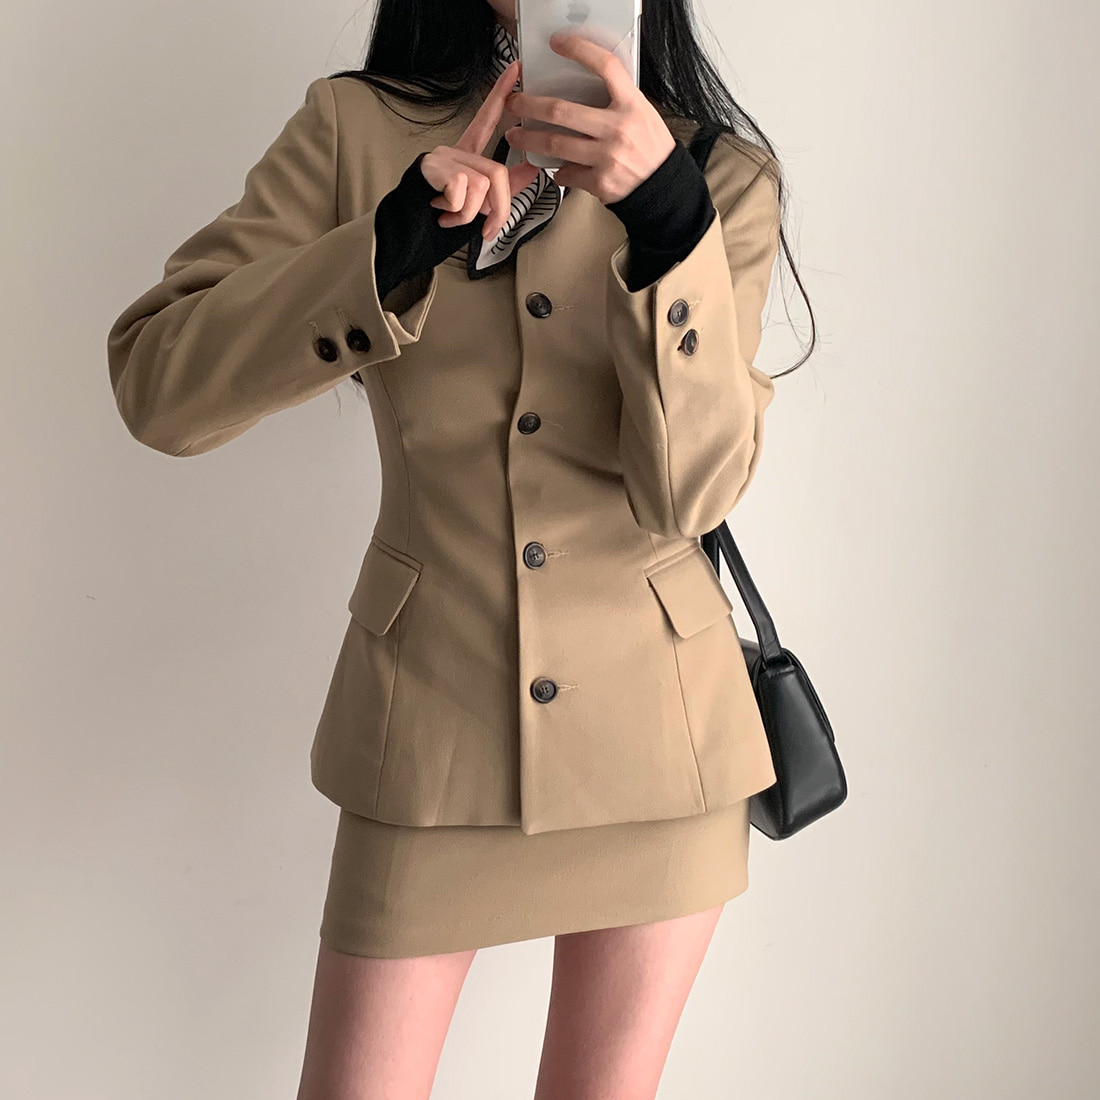 Korean ins spring design round neck single-breasted waist long-sleeved suit jacket + A-line skirt professional suit